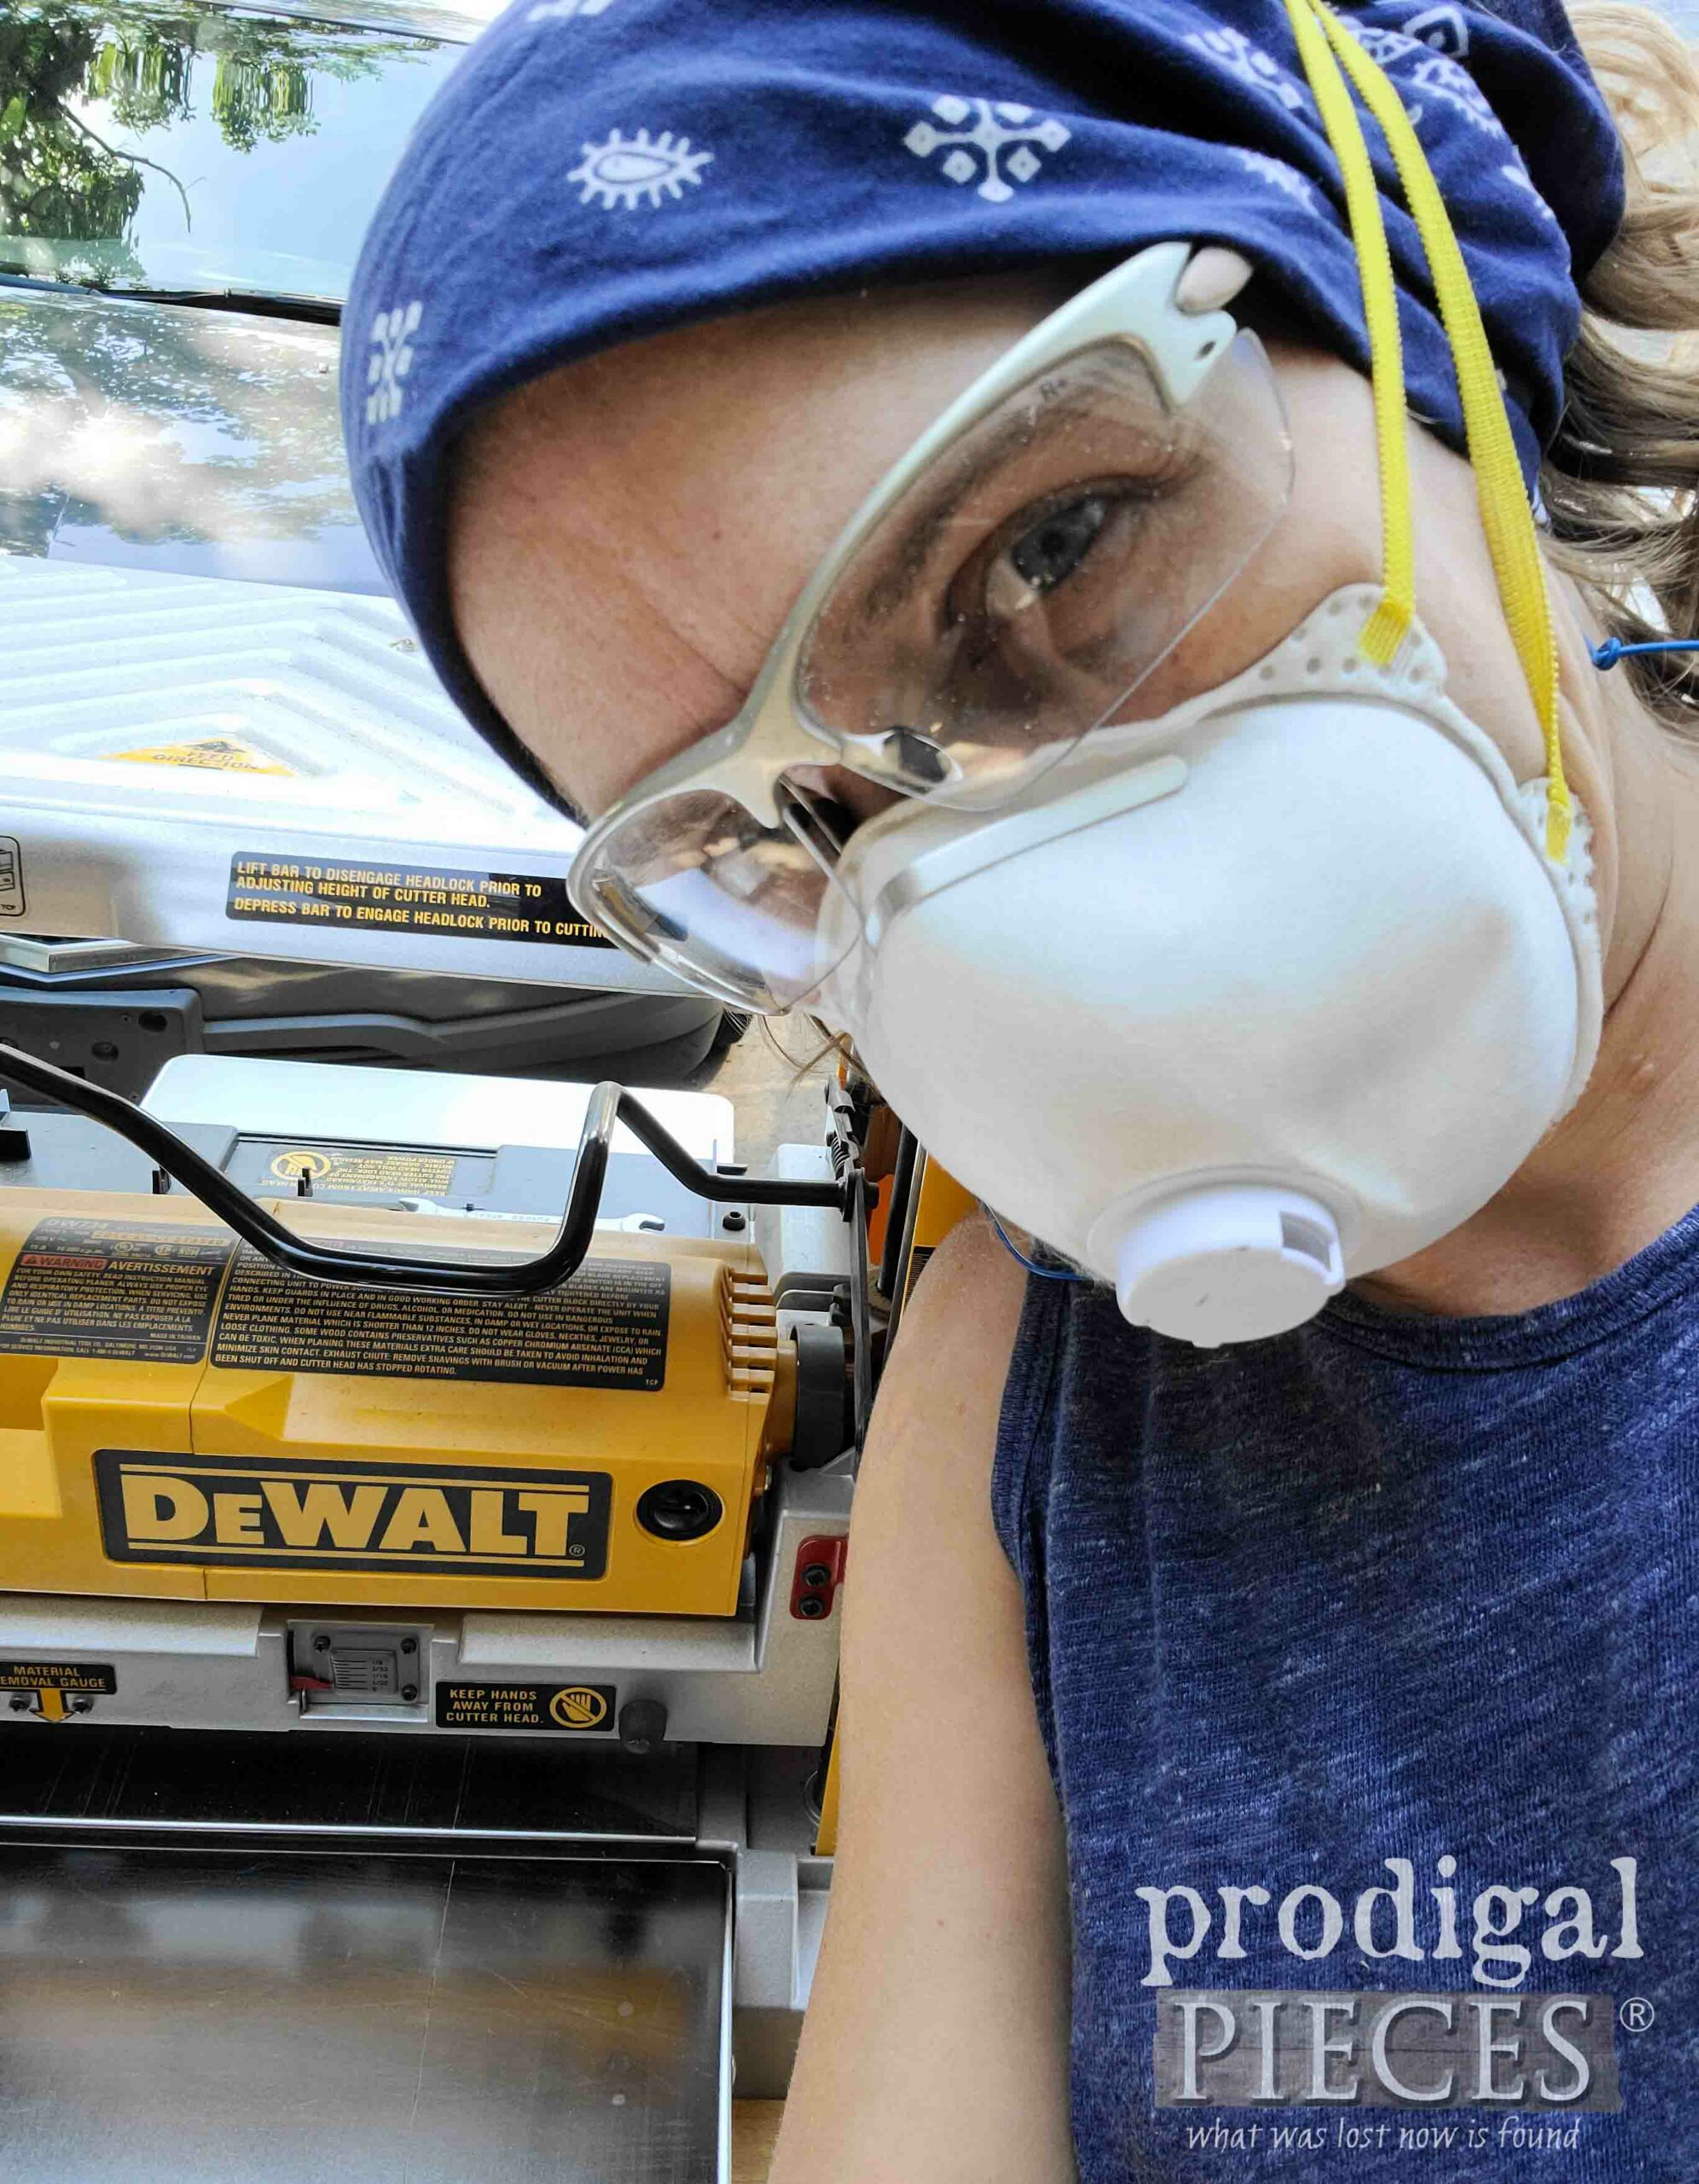 Larissa of Prodigal Pieces with DeWalt Planer for Reclaimed Wood Bench | prodigalpieces.com #prodigalpieces